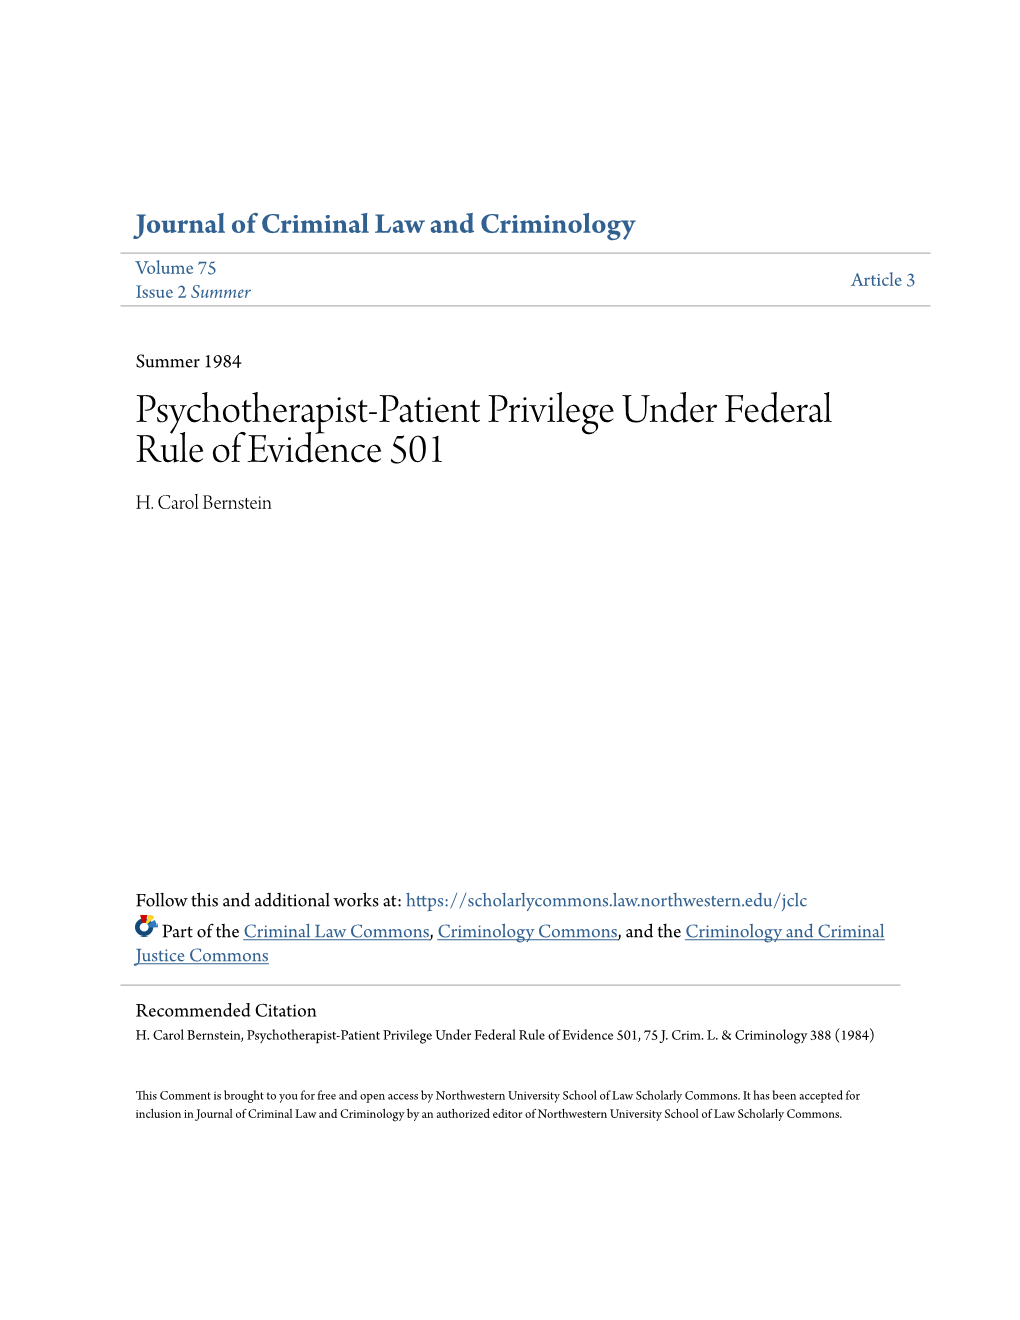 Psychotherapist-Patient Privilege Under Federal Rule of Evidence 501 H